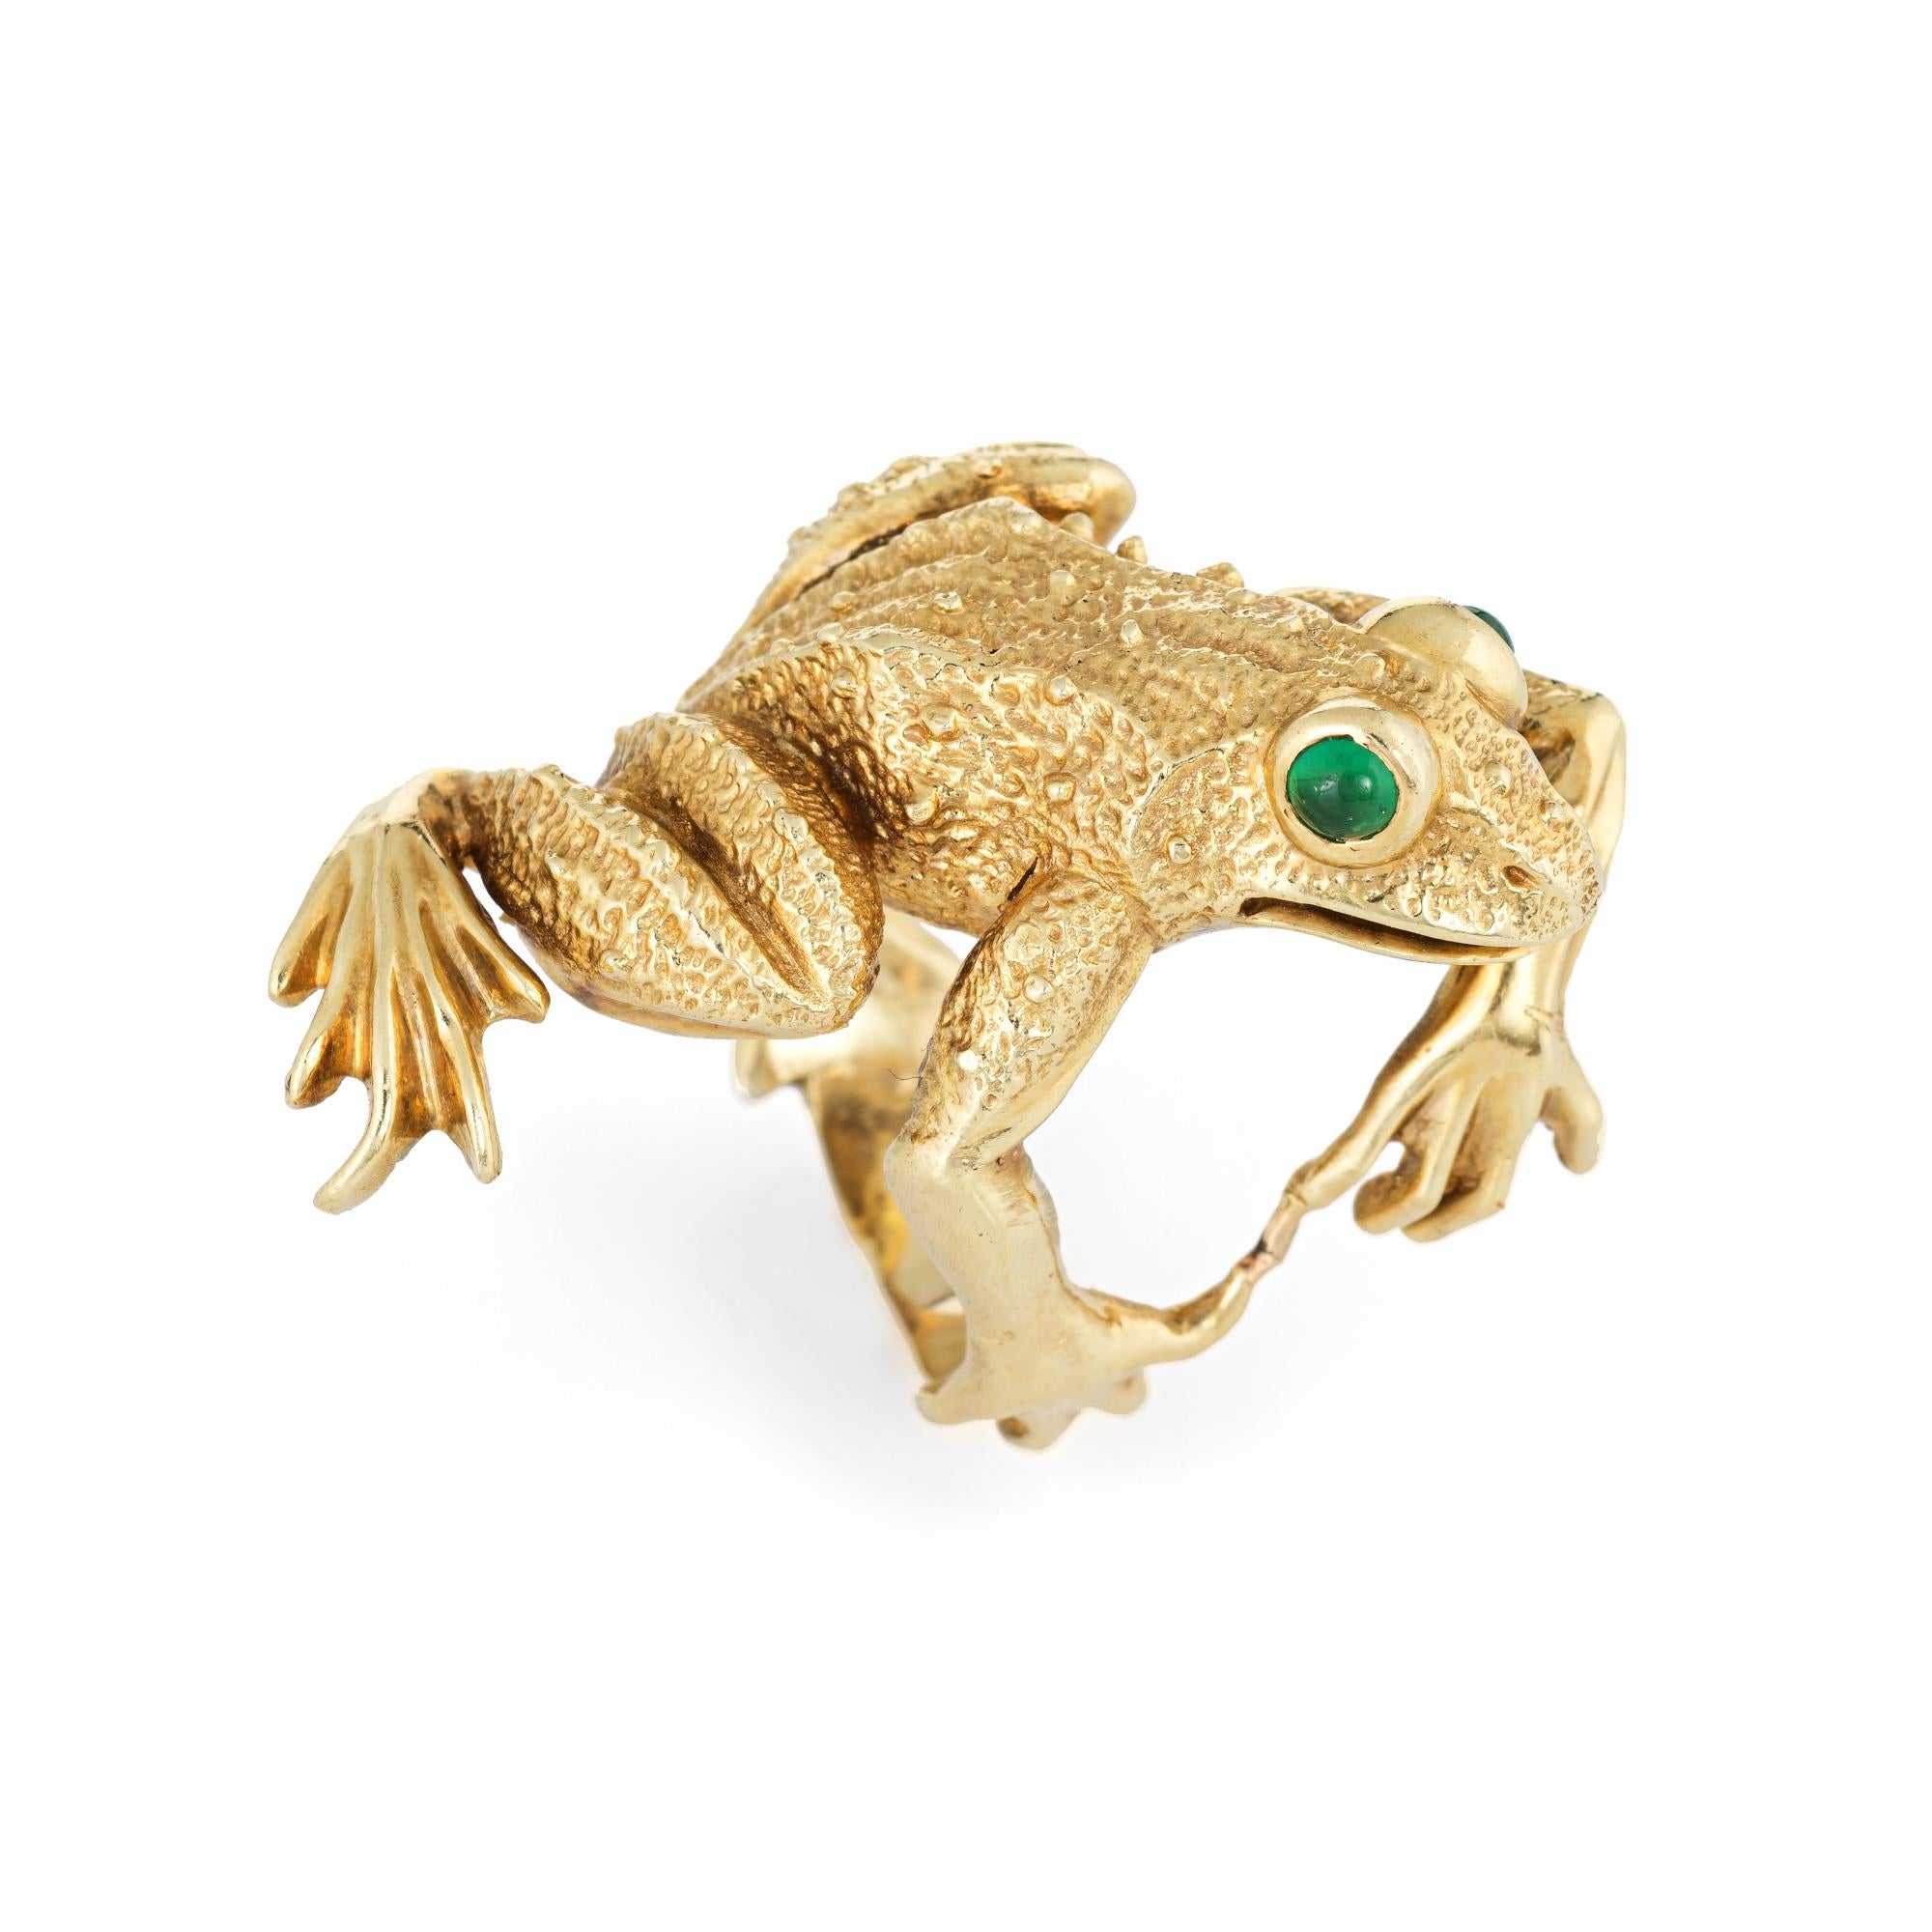 Finely detailed Kurt Wayne Frog ring (circa 1980s) crafted in 18 karat yellow gold. 

Cabochon cut green chalcedony is set into the eyes (estimated at 0.05 carats each - 0.10 carats total estimated weight). The chalcedony is in excellent condition